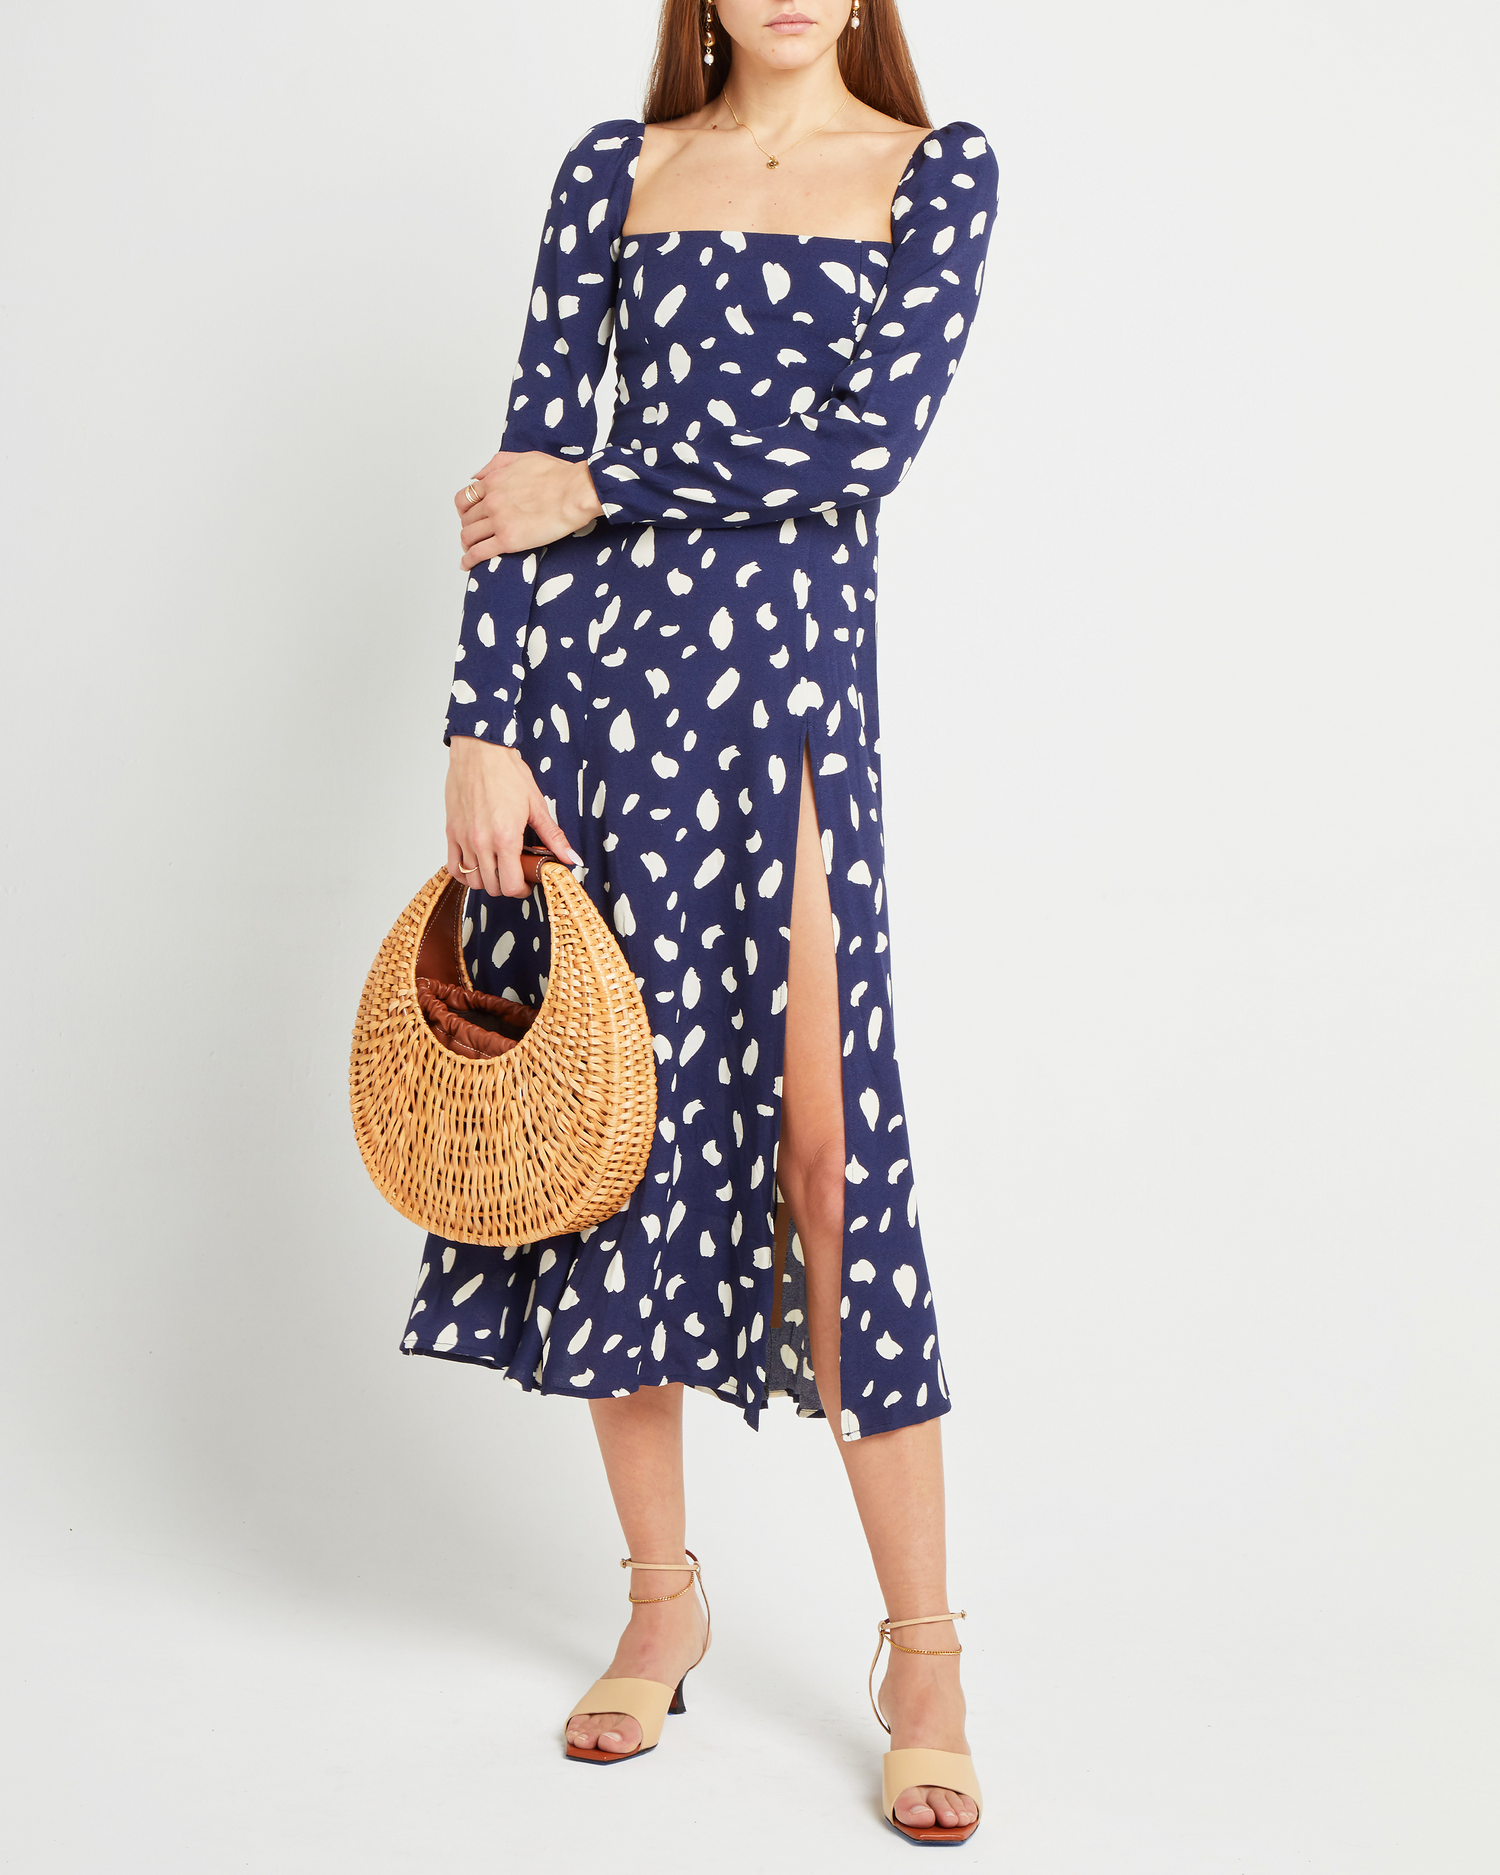 Sixth image of Lenon Dress, a midi dress, side skirt slit, long sleeves, square neckline, blue material with white irregular dots